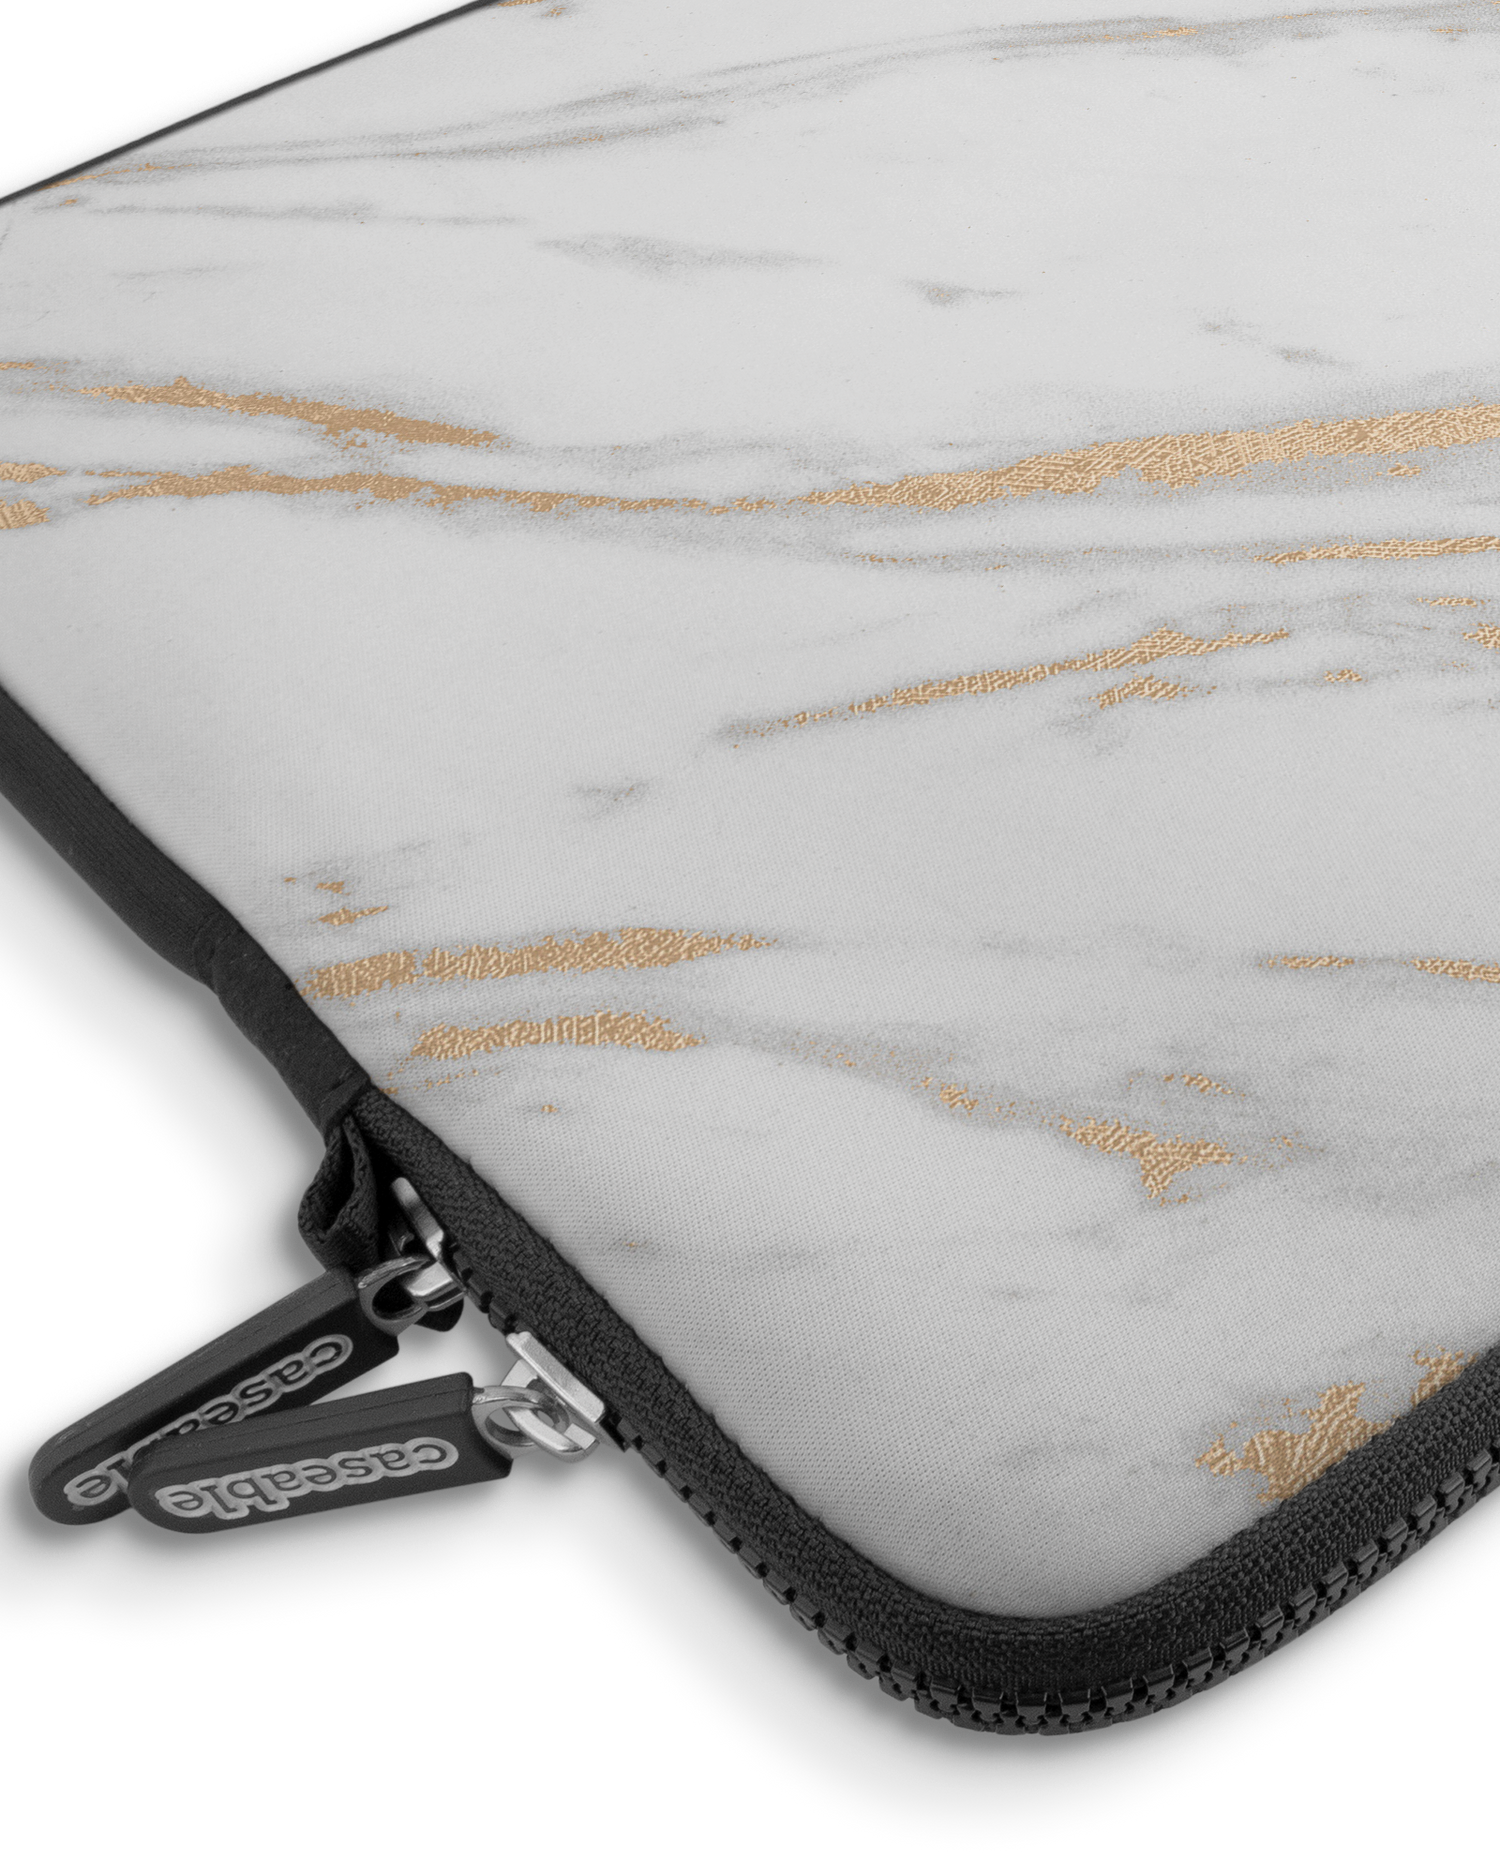 Gold Marble Elegance Premium Laptop Bag 15 inch with device inside